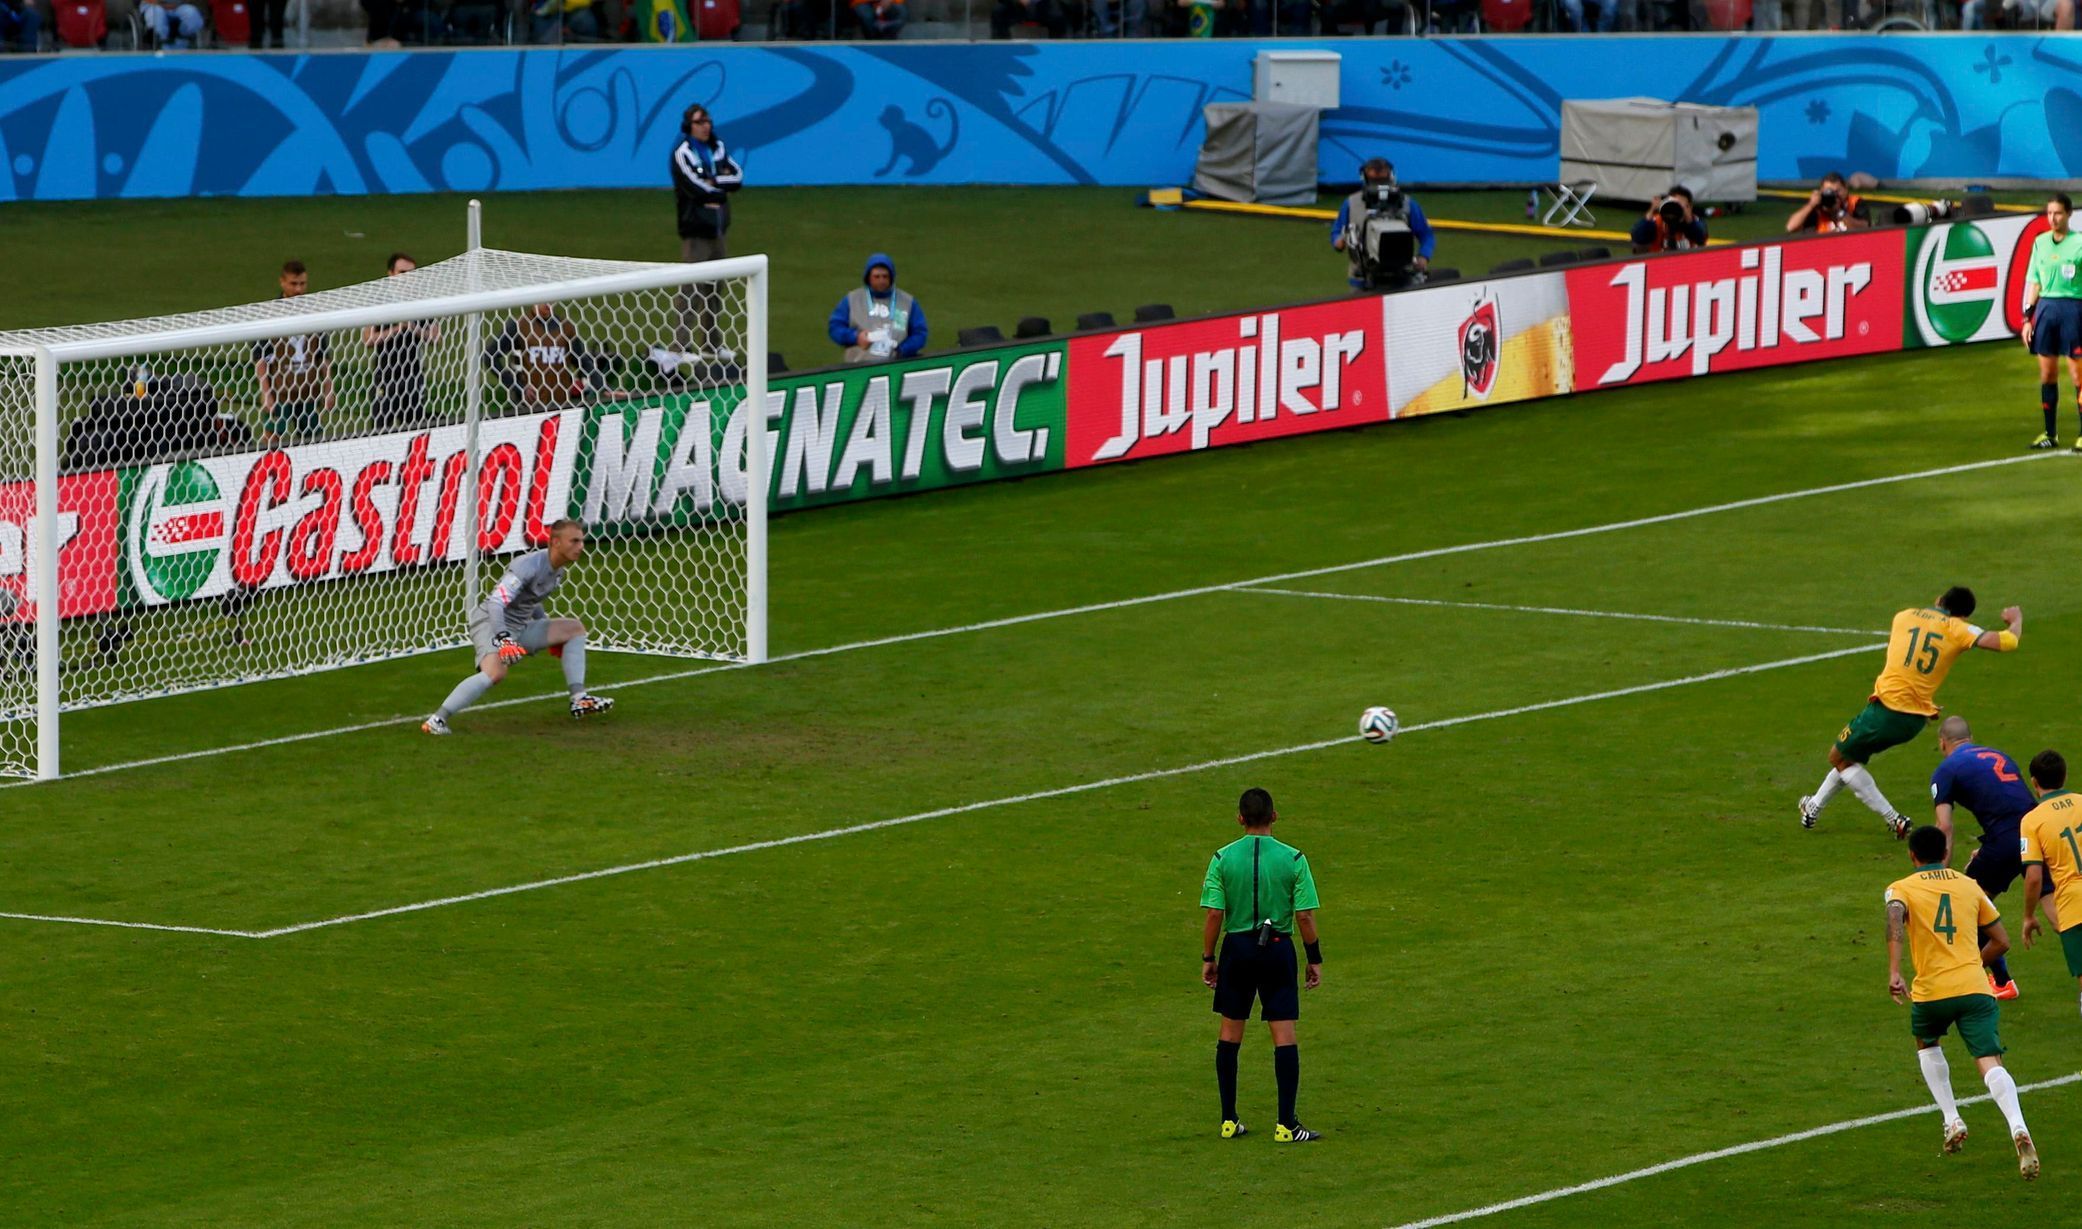 Australia's Jedinak scores a goal from a penalty kick past goalkeeper Cillessen of the Netherlands during their 2014 World Cup Group B soccer match in Porto Alegre